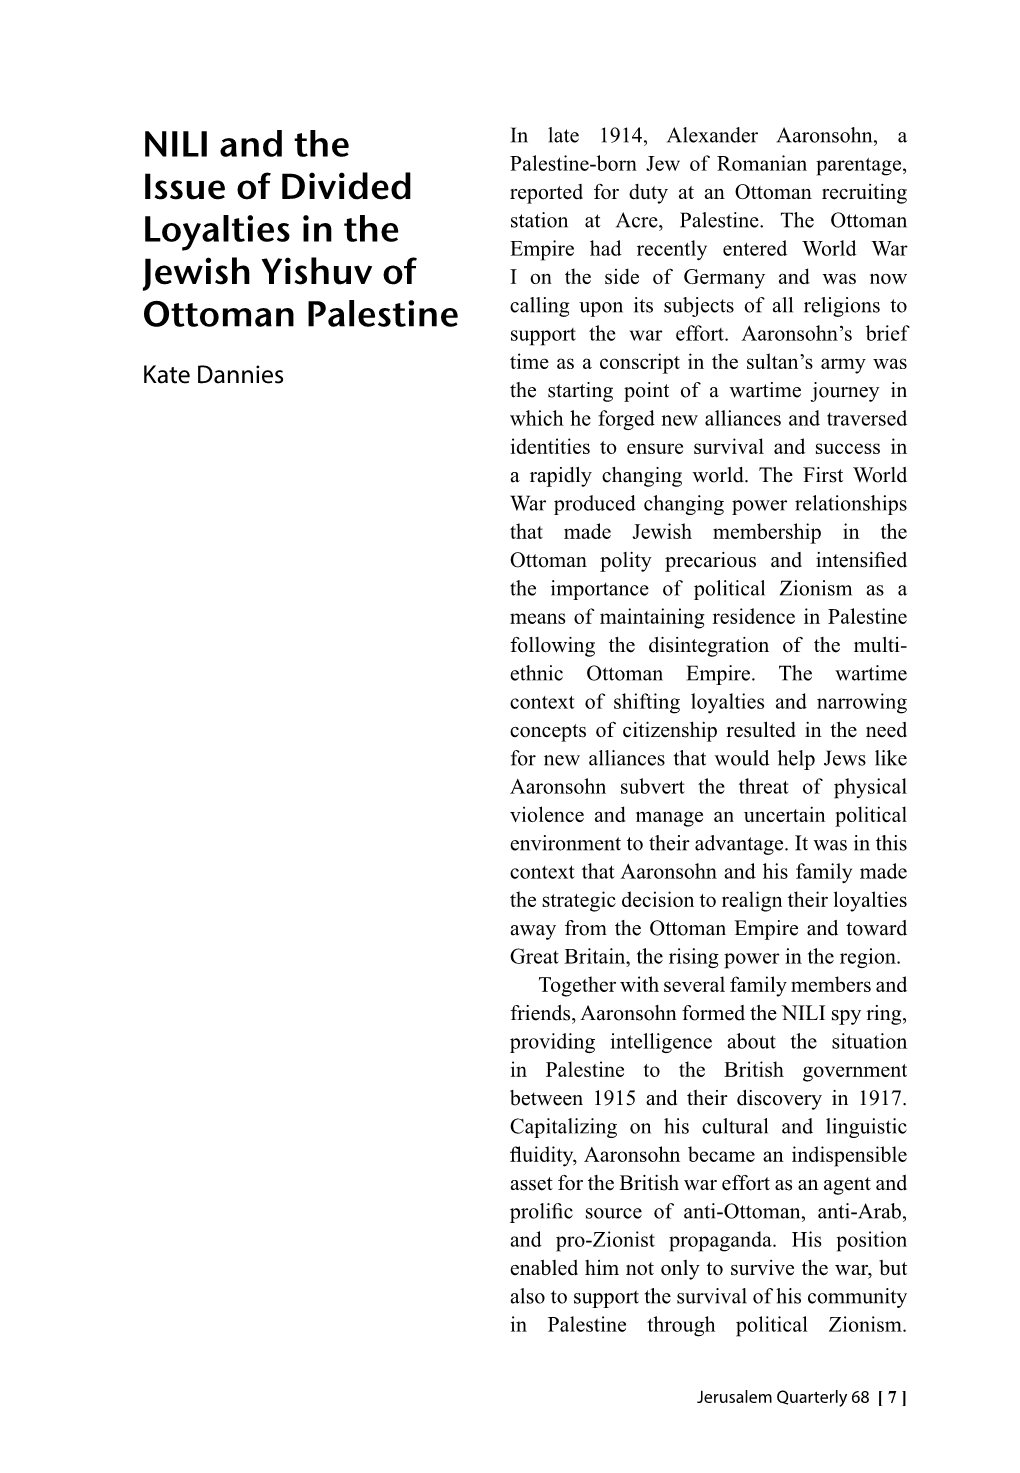 NILI and the Issue of Divided Loyalties in the Jewish Yishuv of Ottoman Palestine